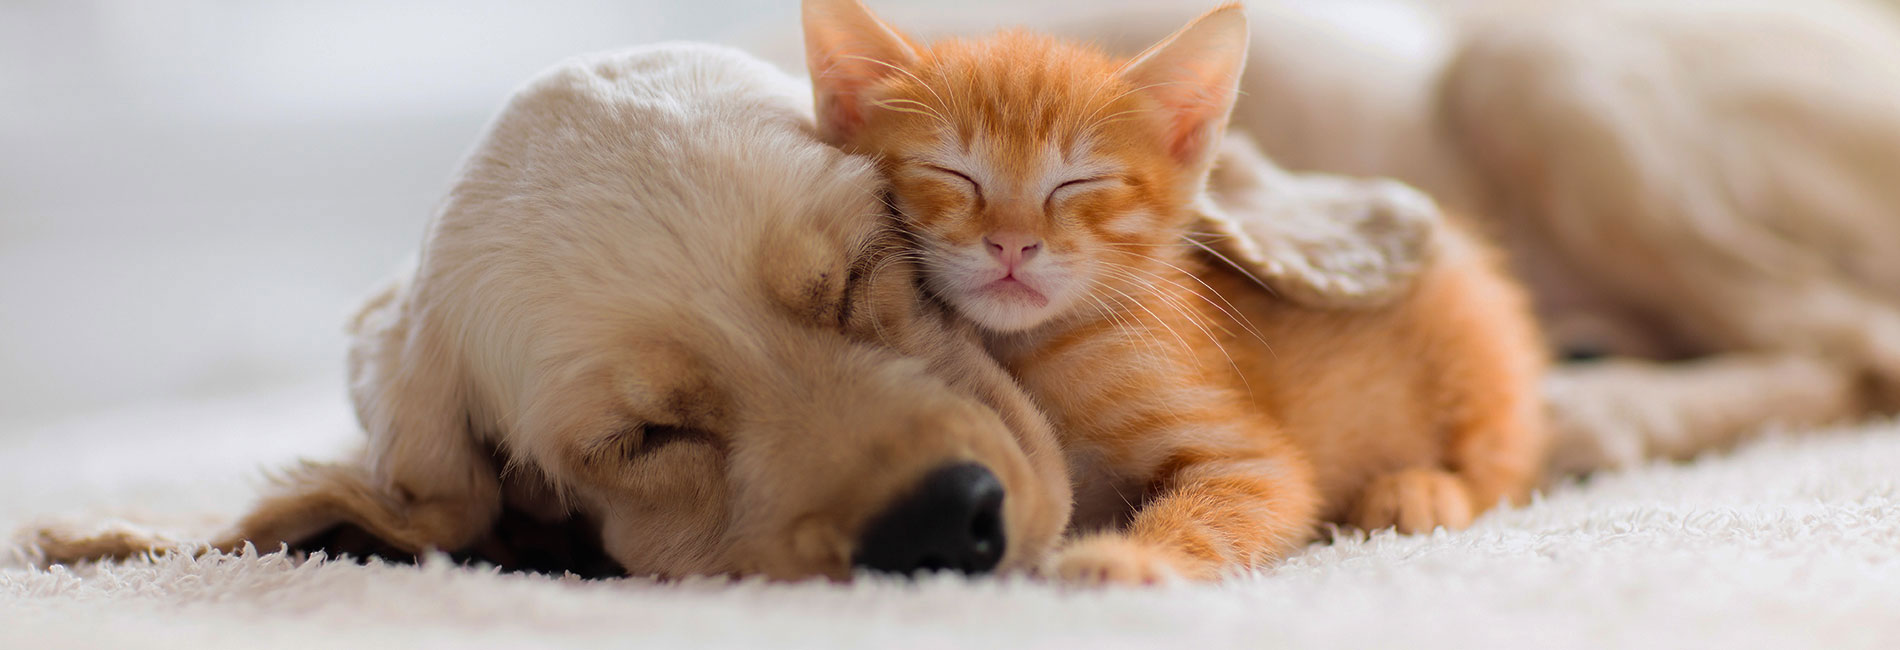 Pictured Pet Dog and Cat Cuddling